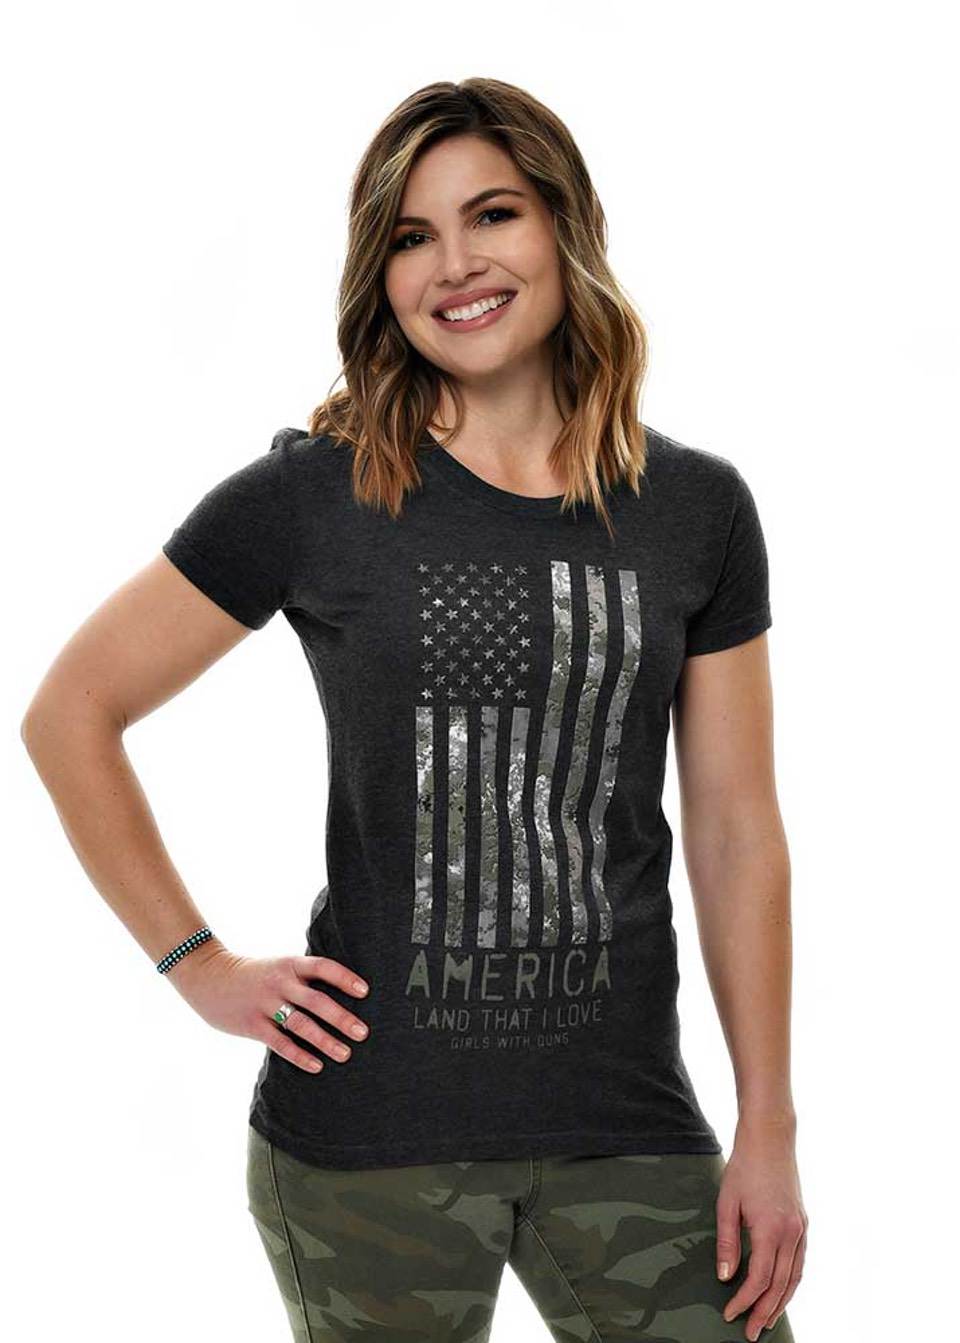 Girls with Guns Clothing Launches Spring Line of Tops and Whitetail Hunt